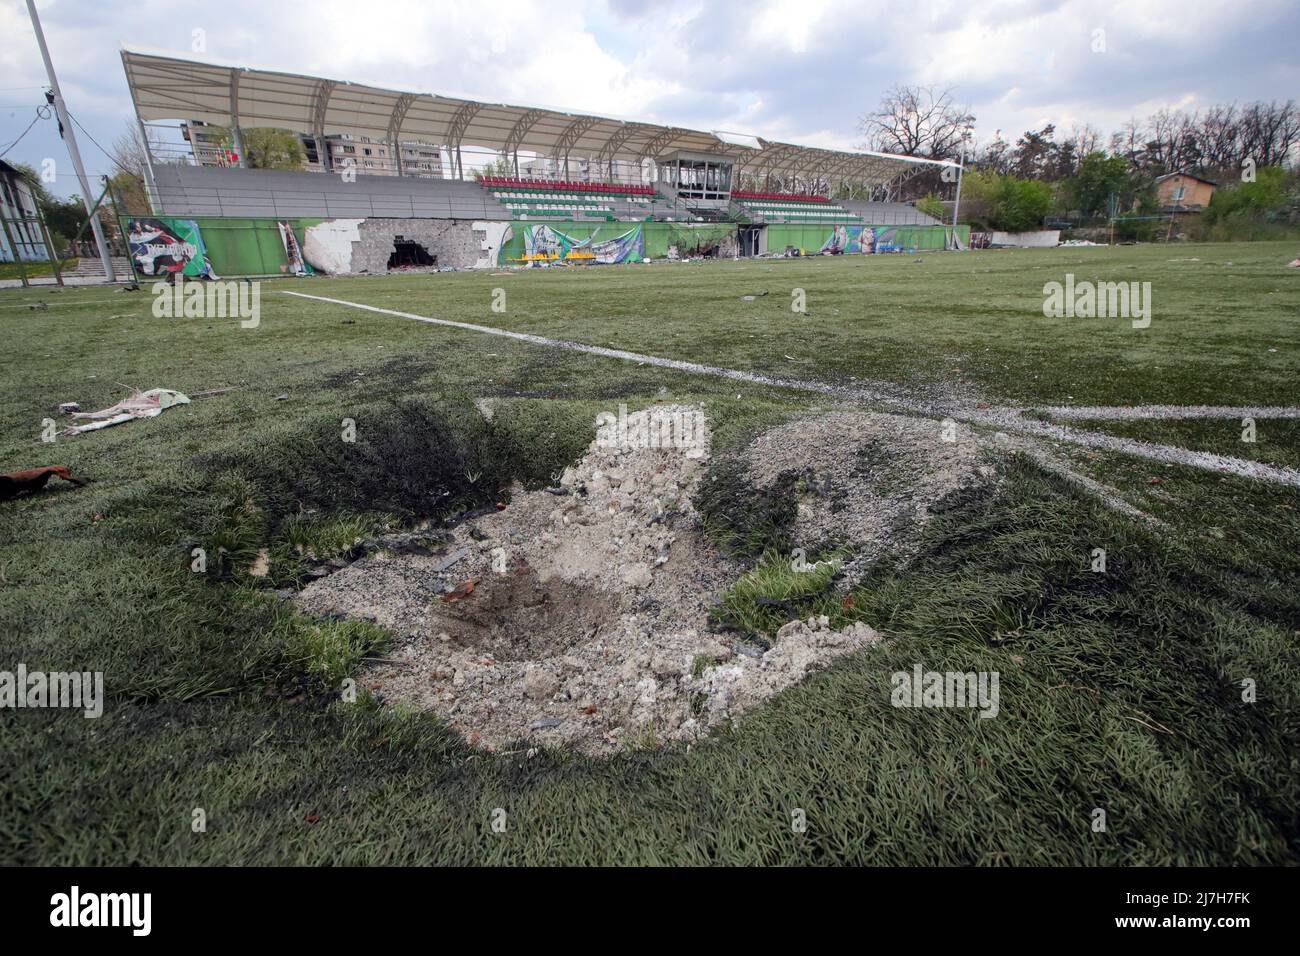 IRPIN, UKRAINE - MAY 8, 2022 -  A crater is pictured on the pitch at the Chempion Stadium damaged as a result of Russian shelling in Irpin, Kyiv Regio Stock Photo